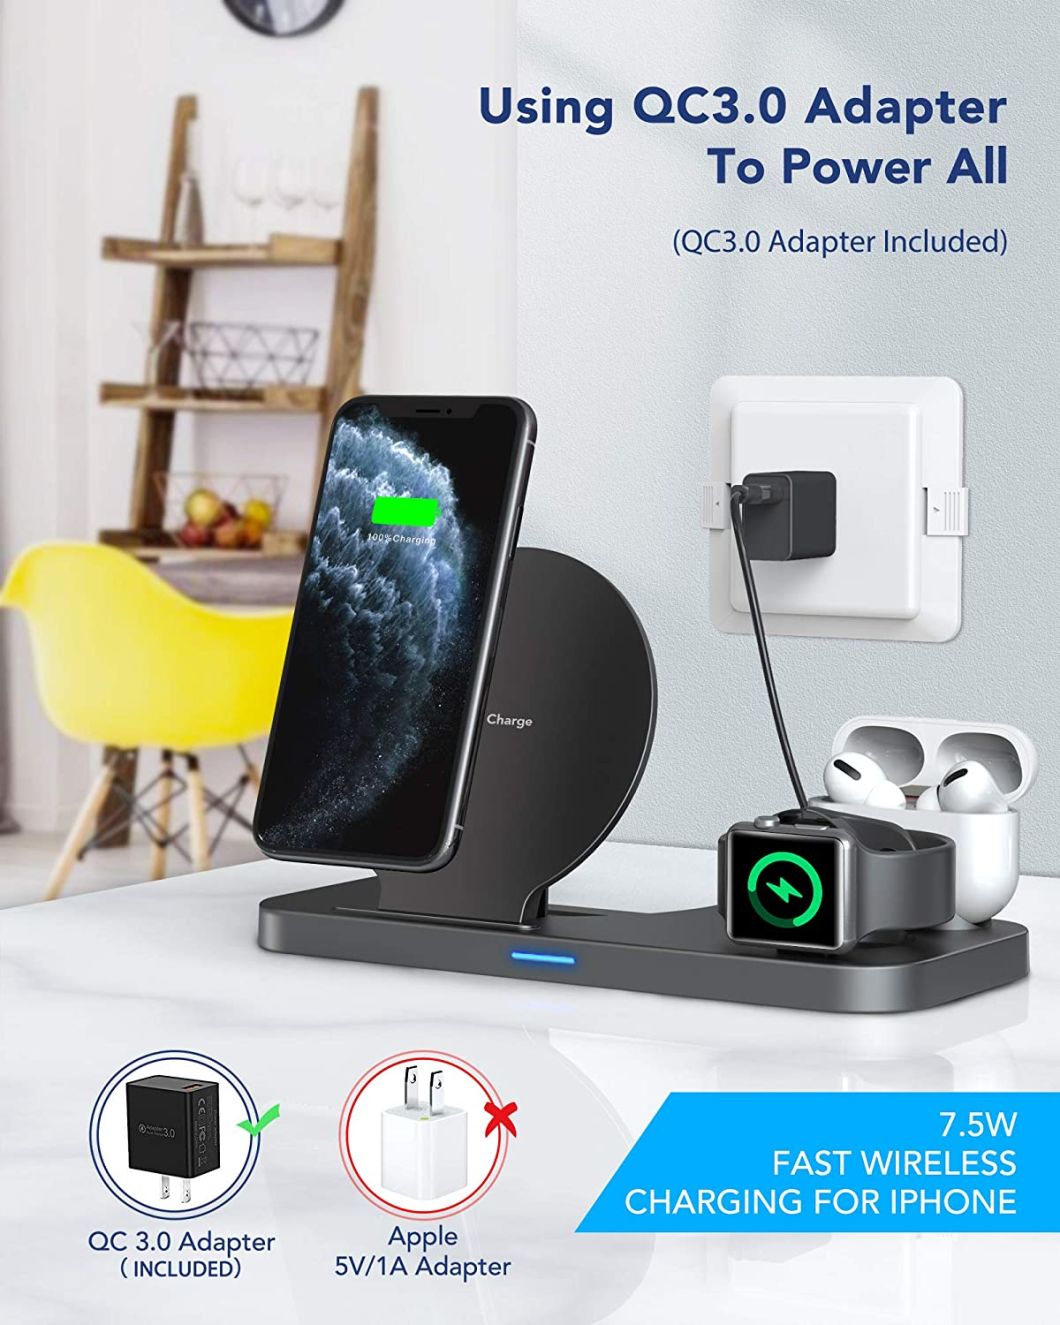 2020 Latest Wireless Charger, 3 in 1 Qi-Certified Wireless Charging Station for Airpods/Apple Watch Series 6/5/4/3/2/1, Fast Wireless Charging Stand.